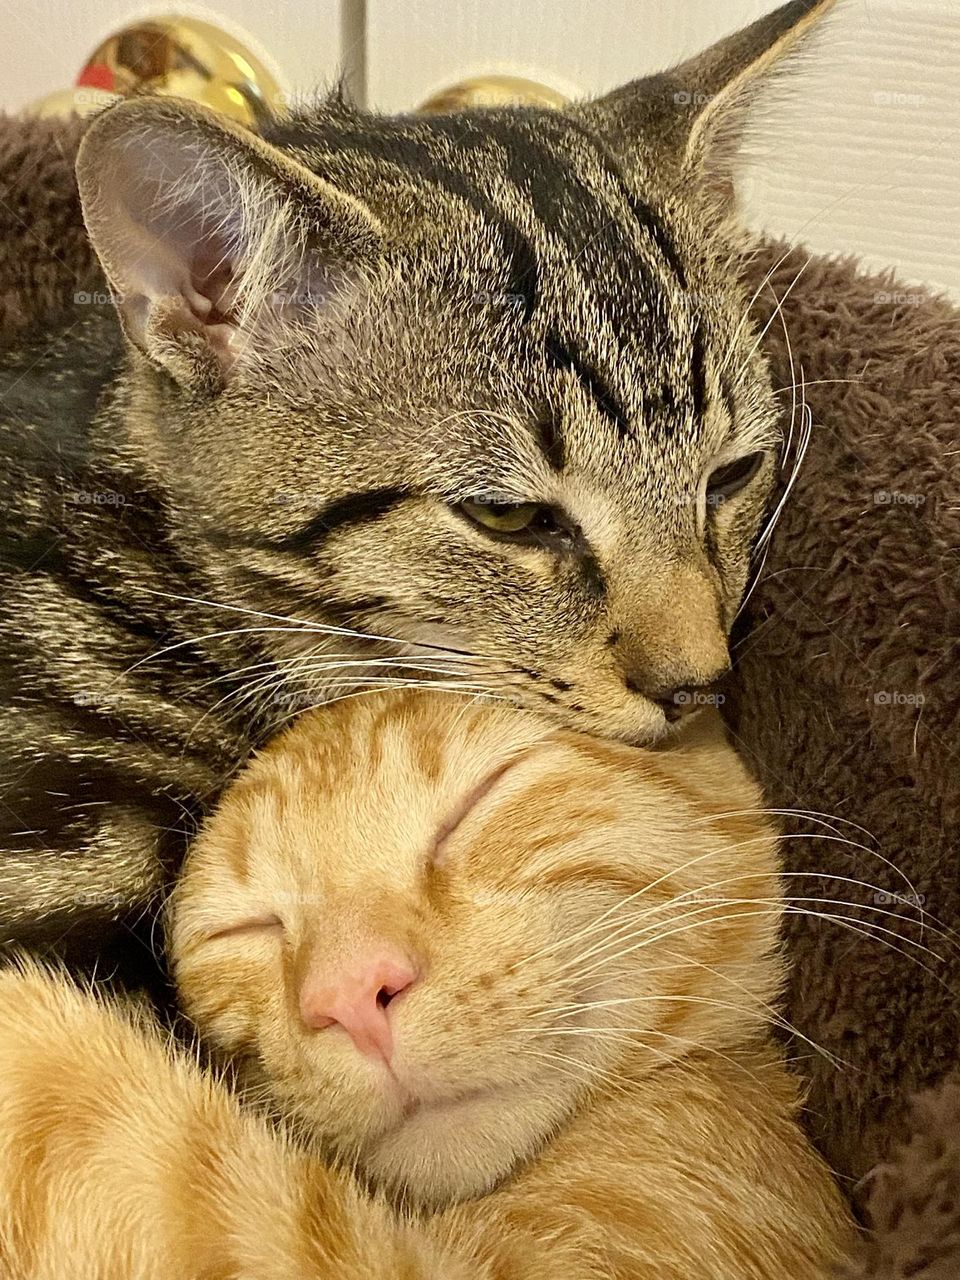 Two cats snuggles up together in a cat bed